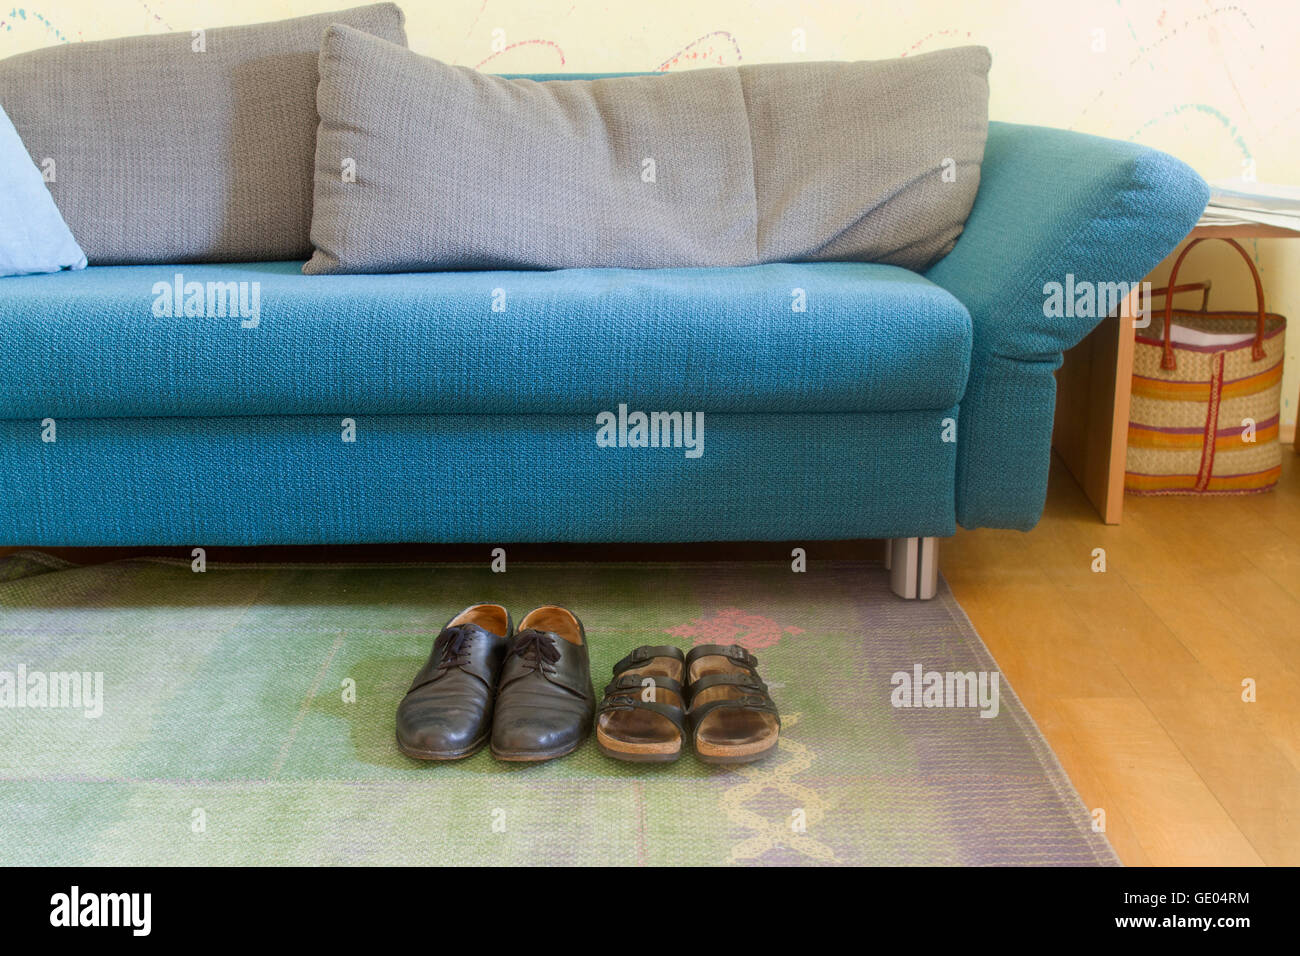 Sofa in living room with shoes Stock Photo